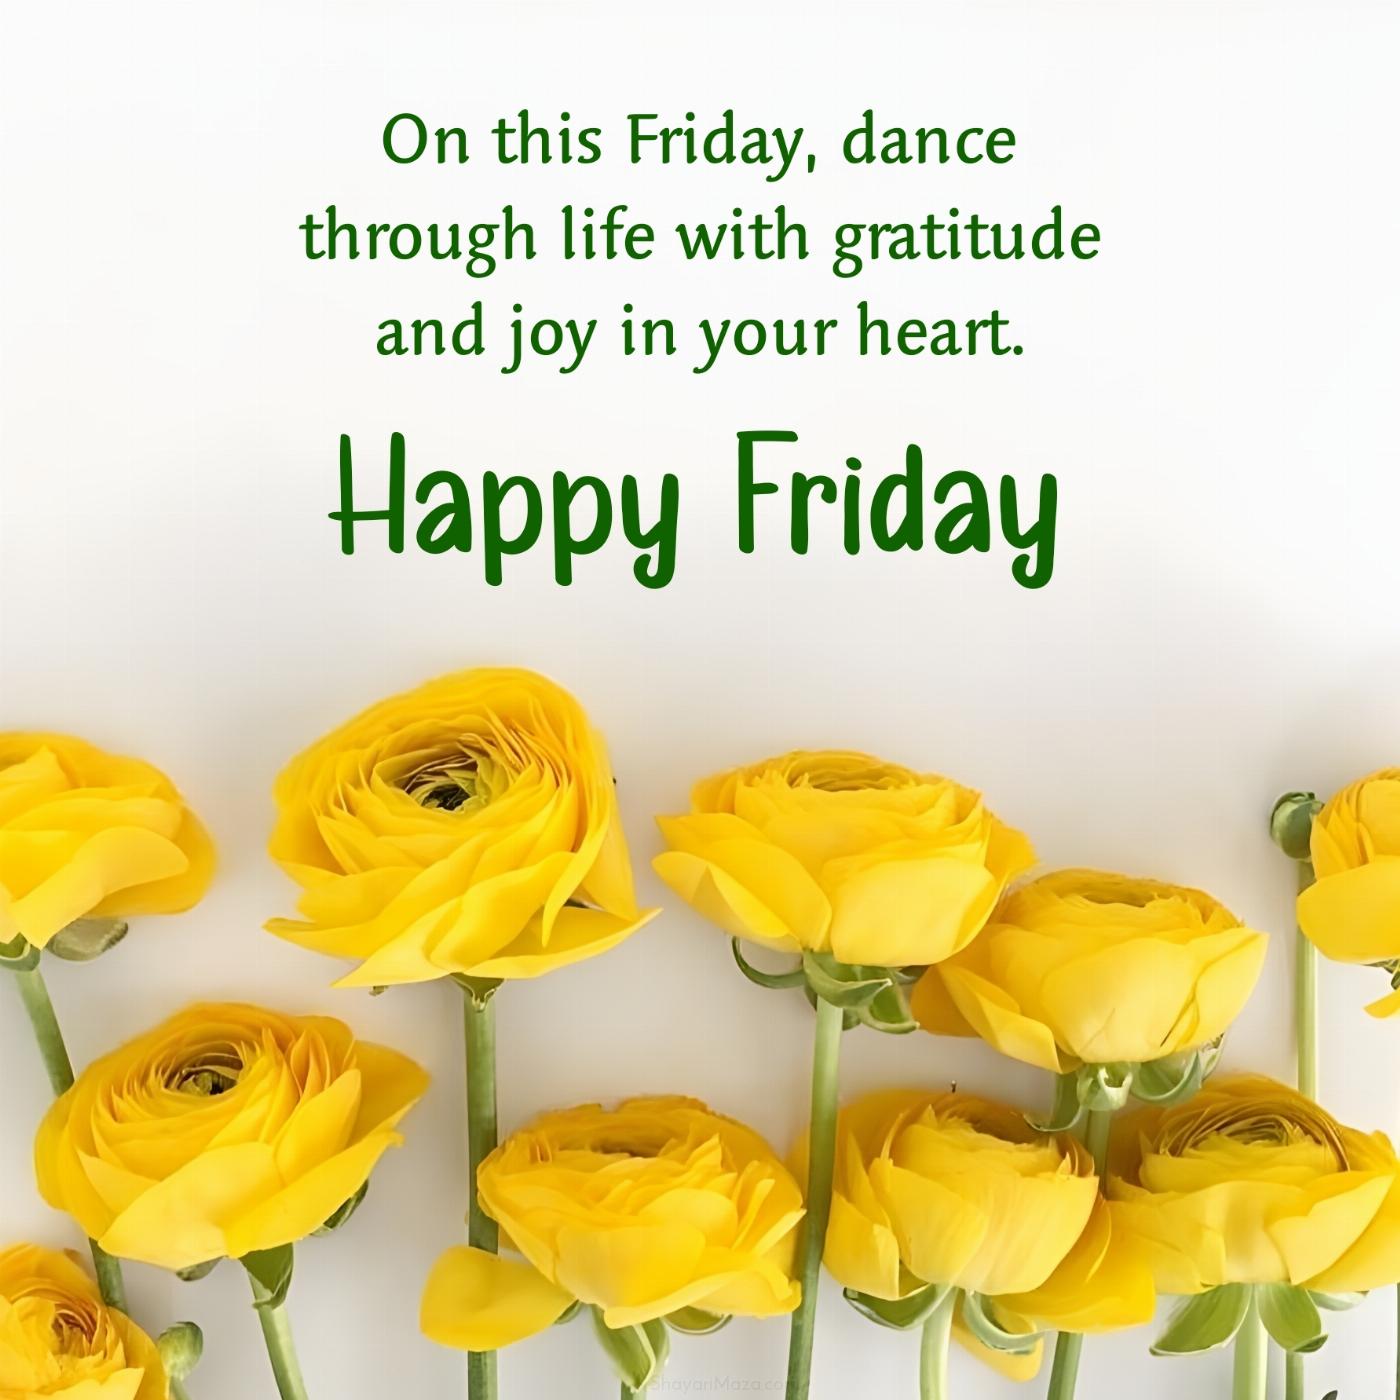 On this Friday dance through life with gratitude and joy